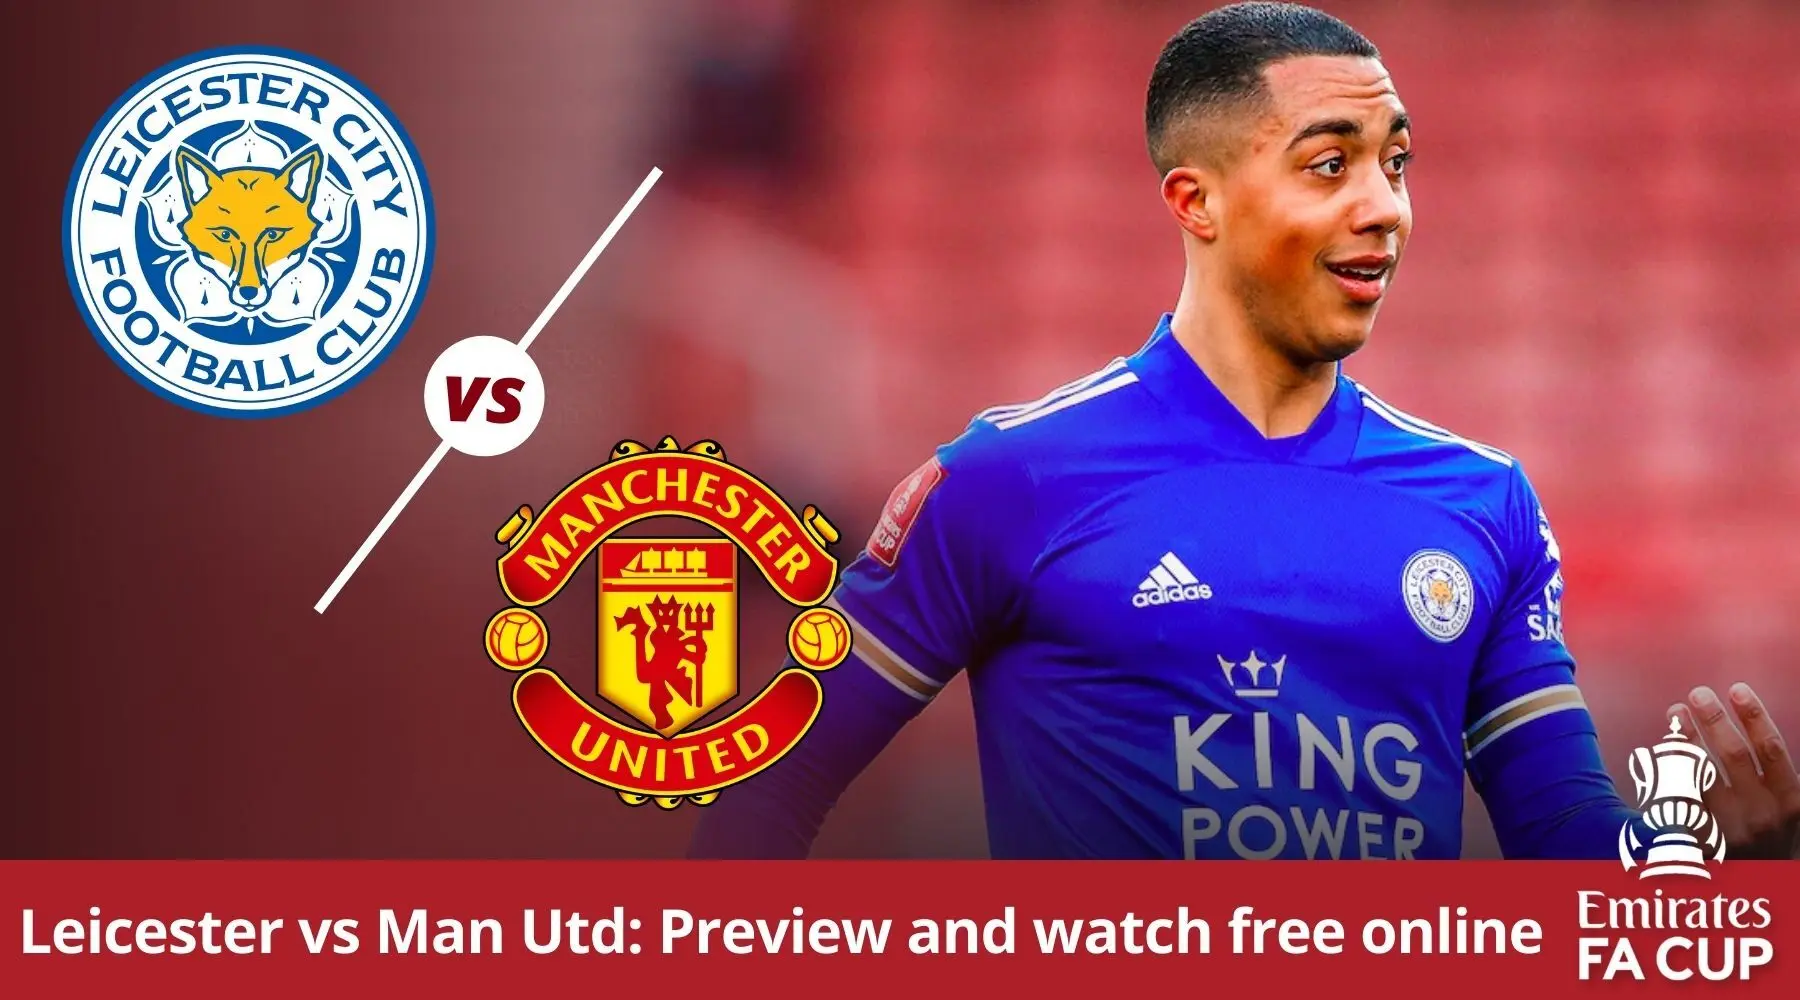 How to watch Leicester vs Man United FA Cup quarter-final live in Australia